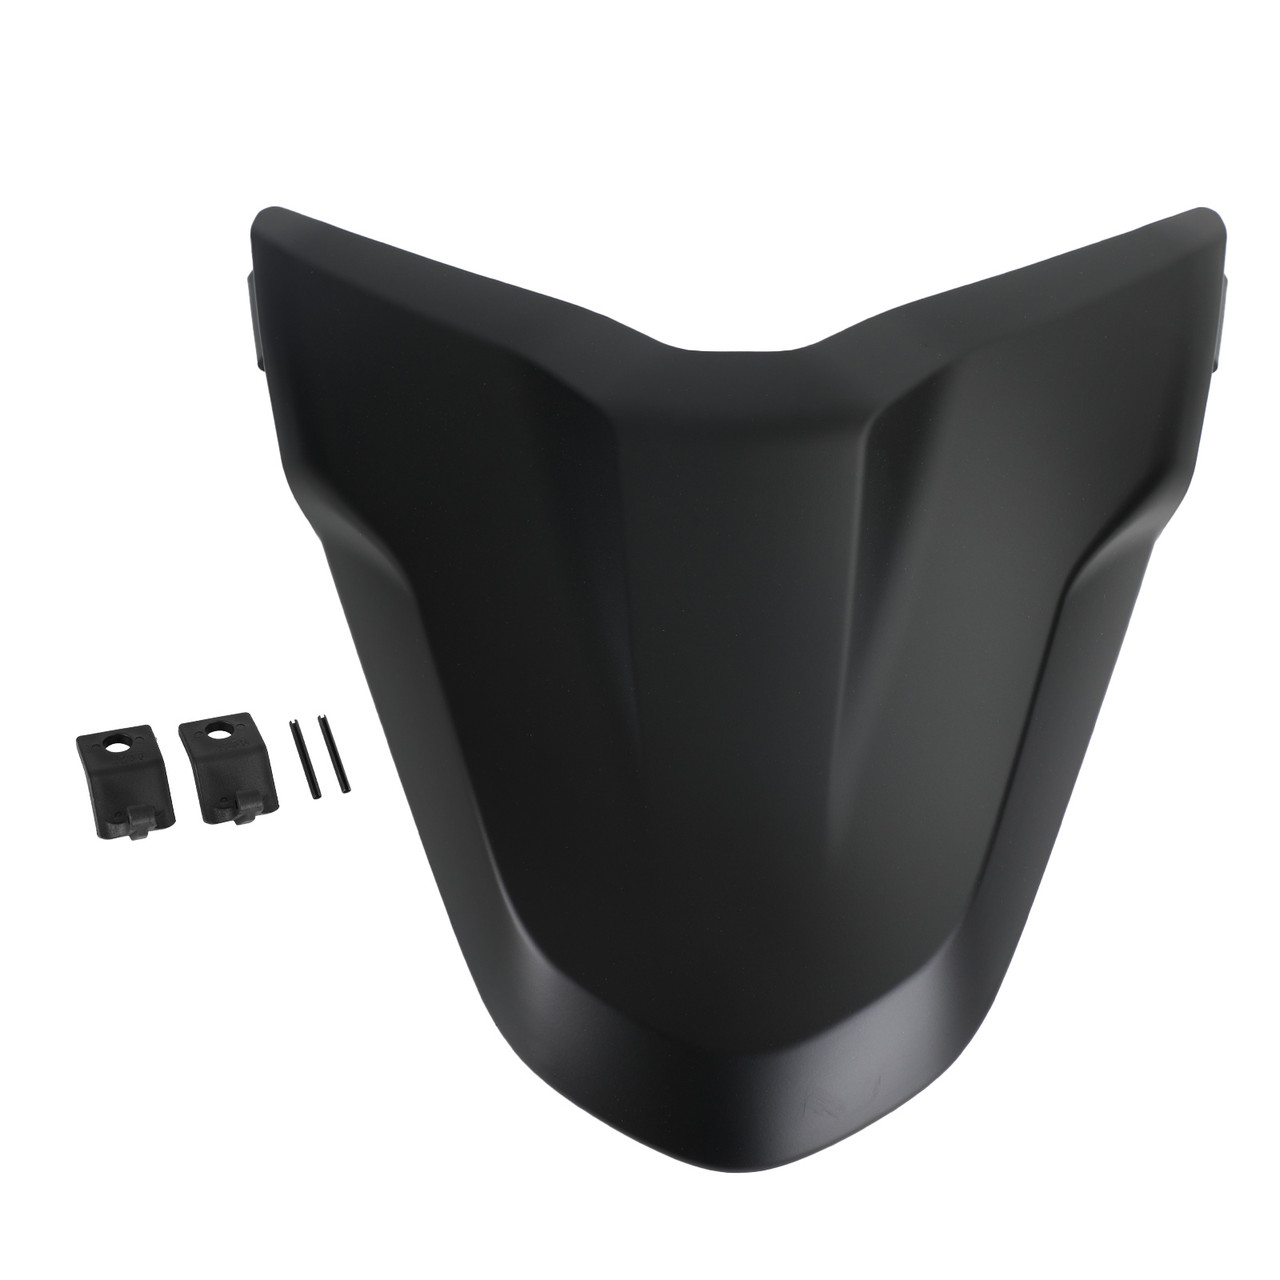 Tail Rear Seat Cover Fairing Cowl fit for DUCATI Supersport 939 All Year MBLK